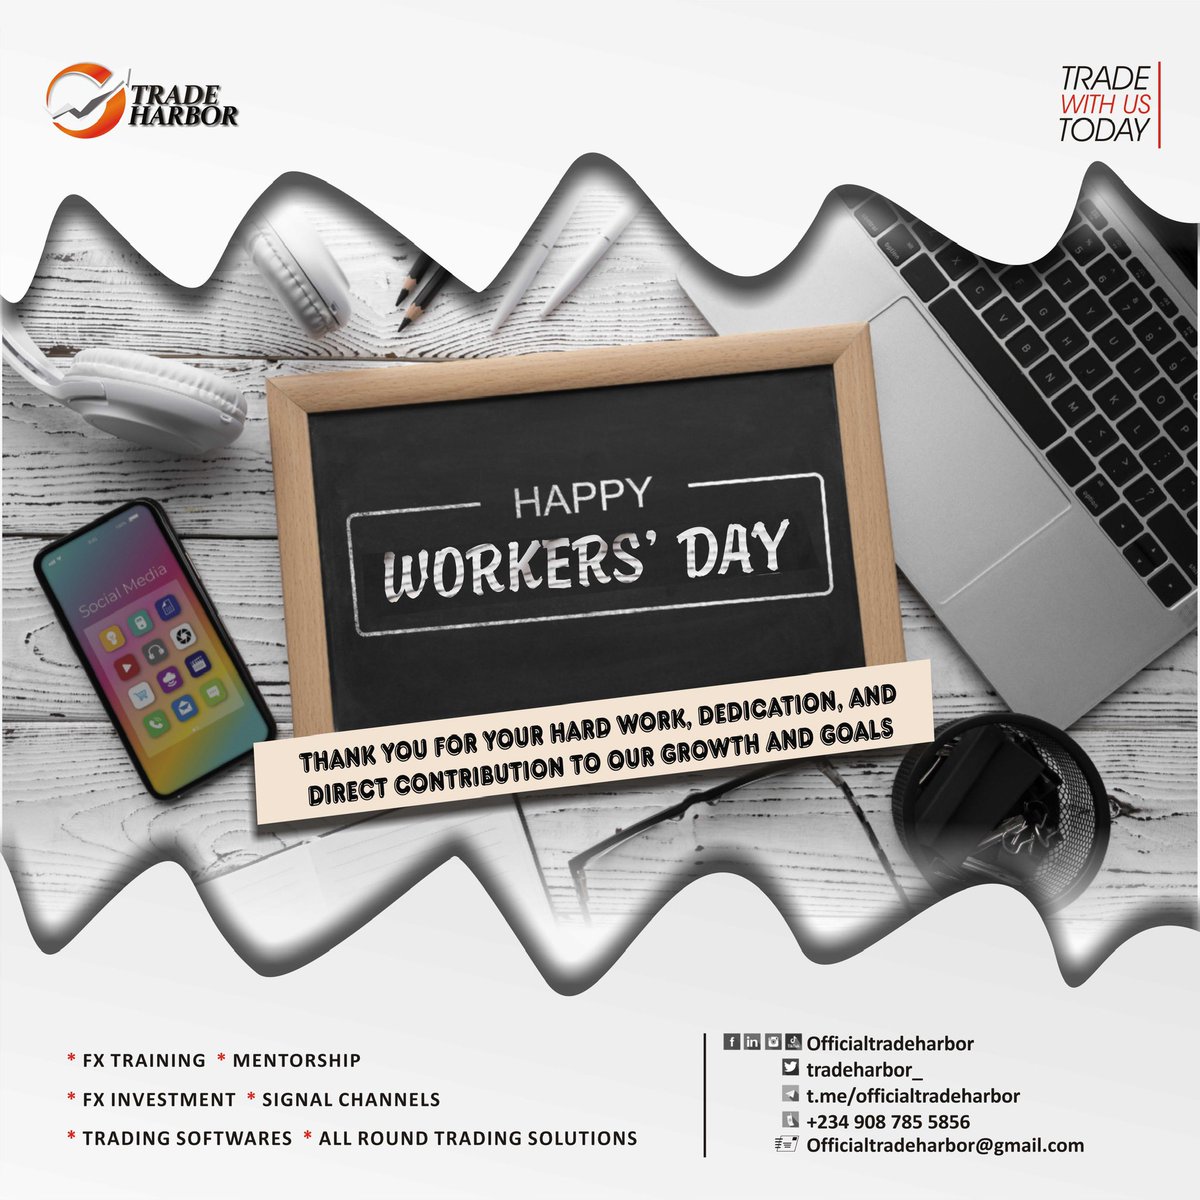 Happy Workers’ Day 🛠️👷‍♀️👷‍♂️

#ForexTrading #CurrencyMarkets #ForexAnalysis #FXSignals #TradingStrategy #ForexNews #CurrencyPairs #FXMarket #TradingTips #ForexCommunity #mayday #workersday